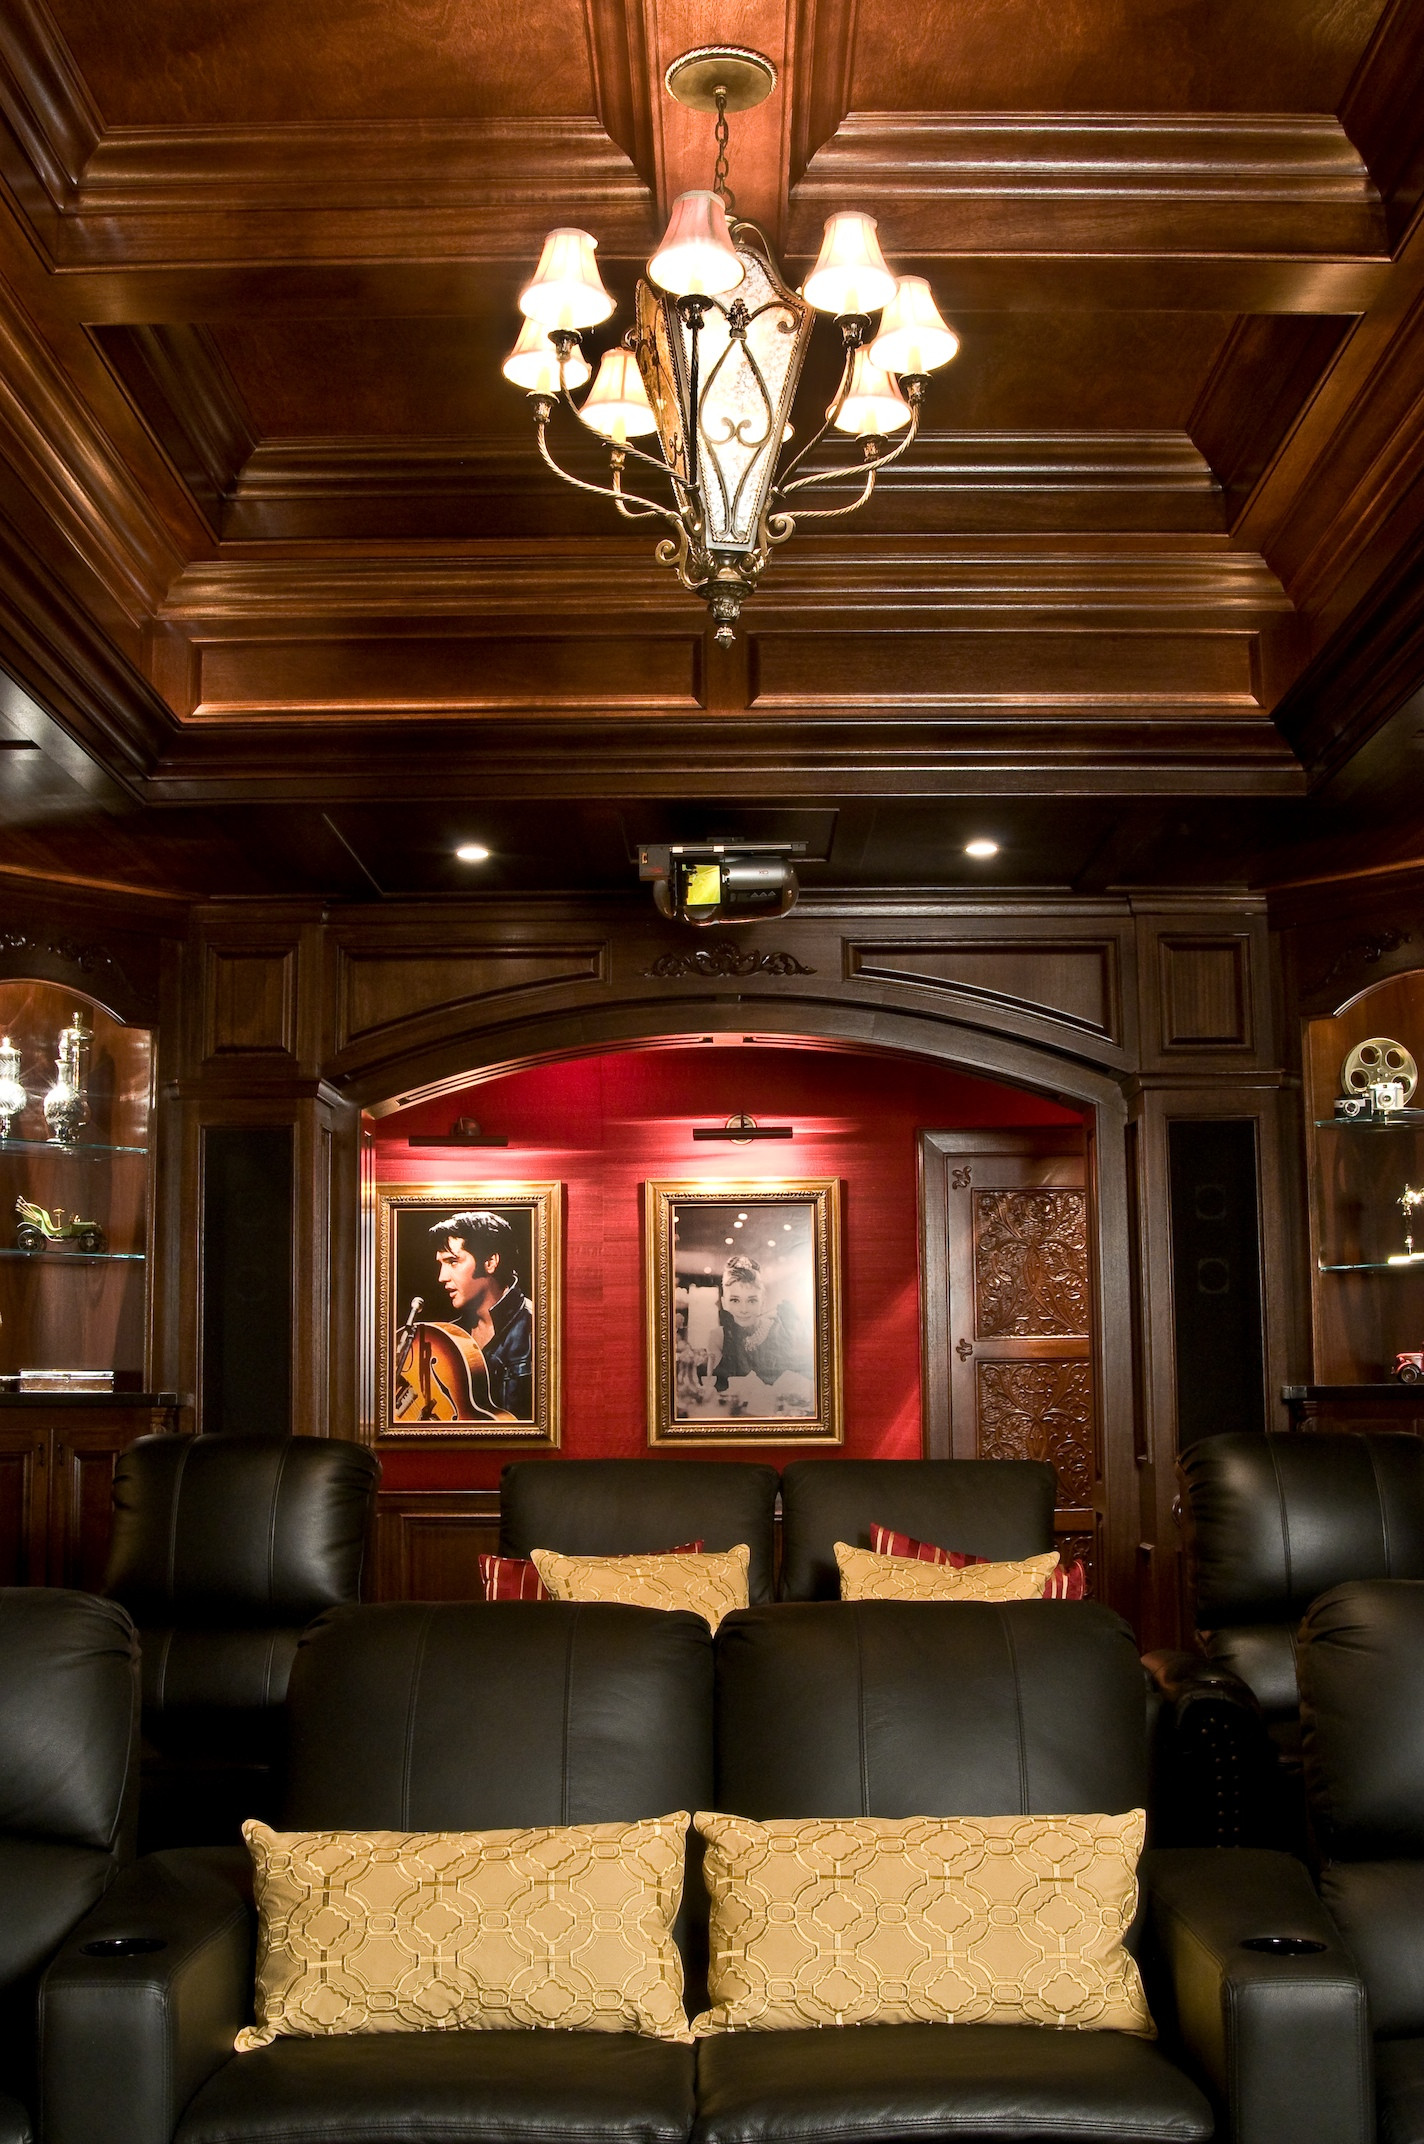 Home Theater interiors